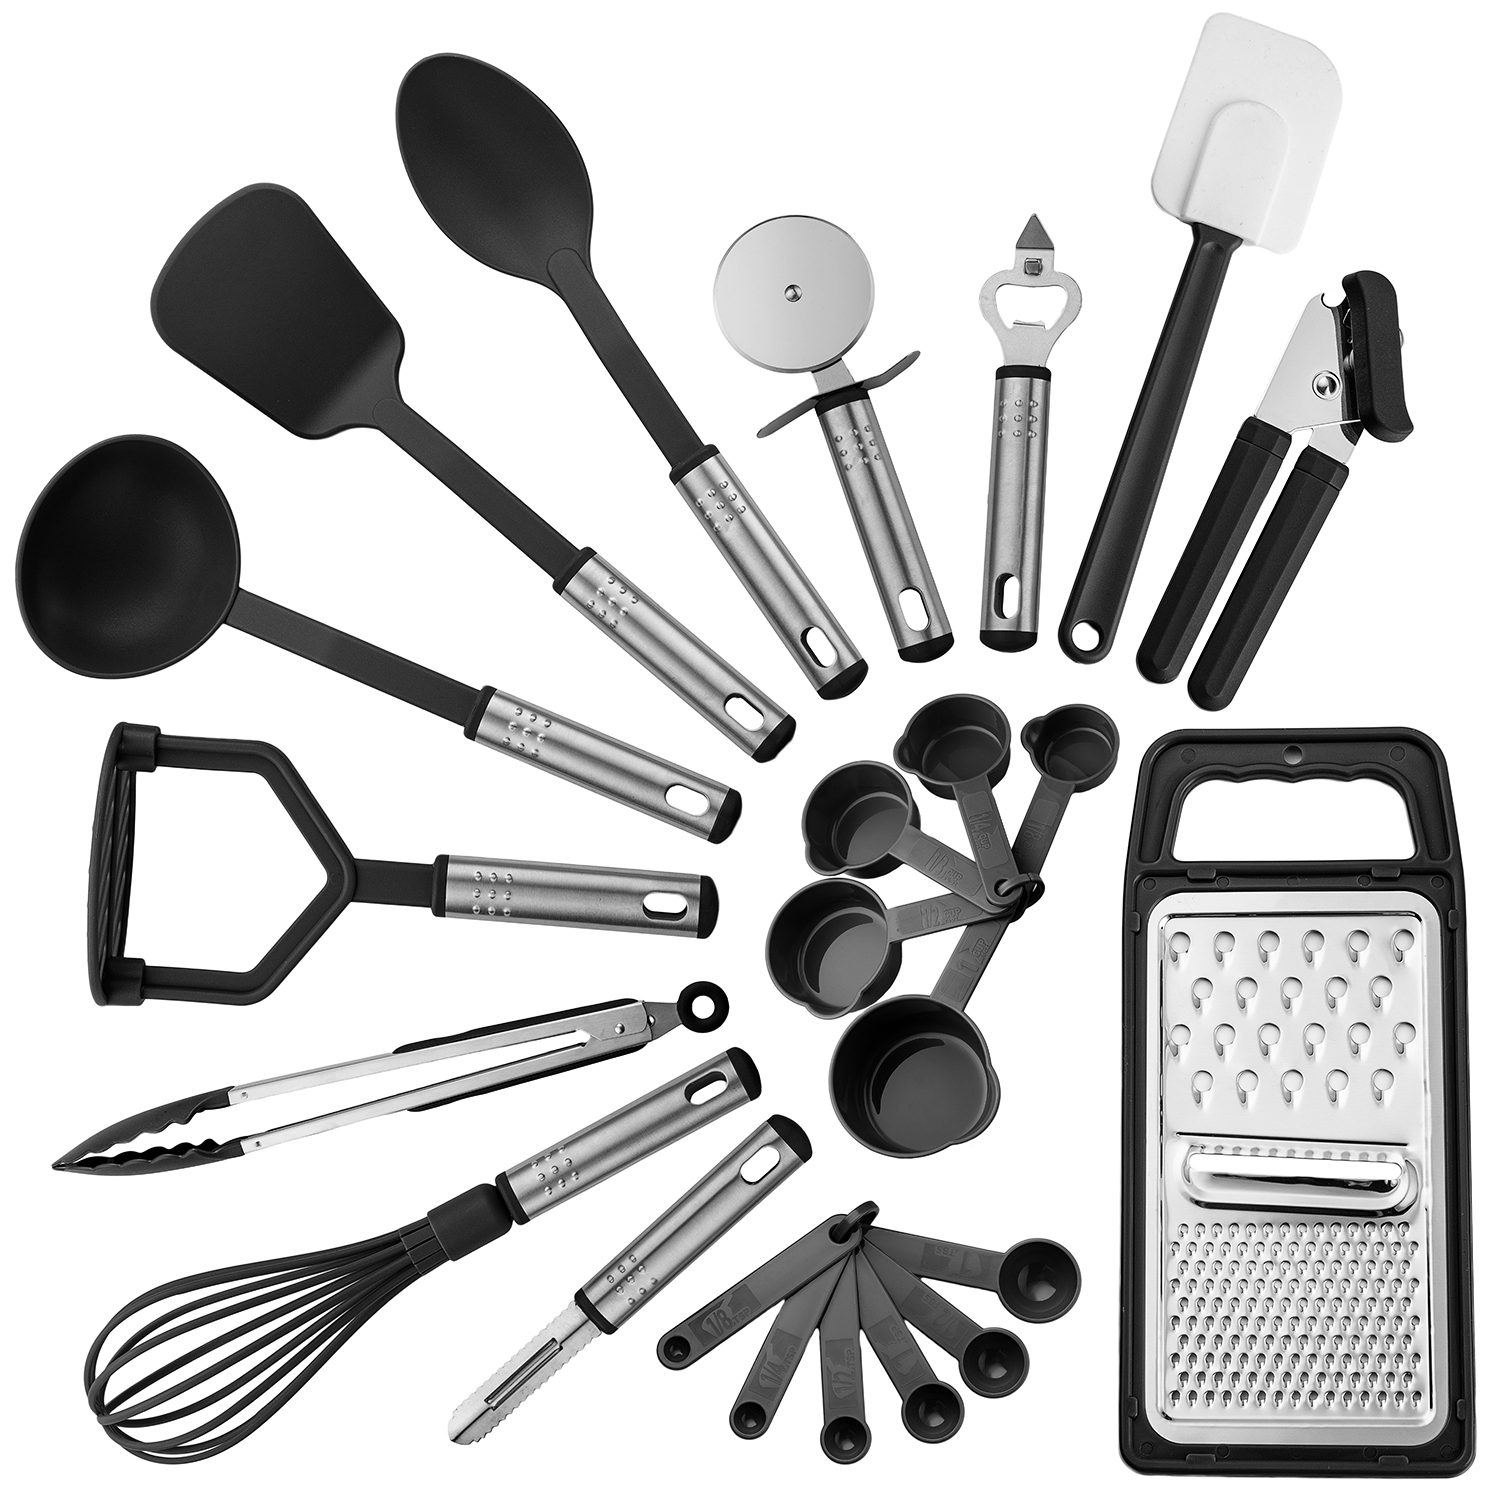 Lux Decor Collection 23 Piece Kitchen Utensil Set Nonstick Heat Resistant Stainless Steel & Nylon Cooking Items Black and Grey